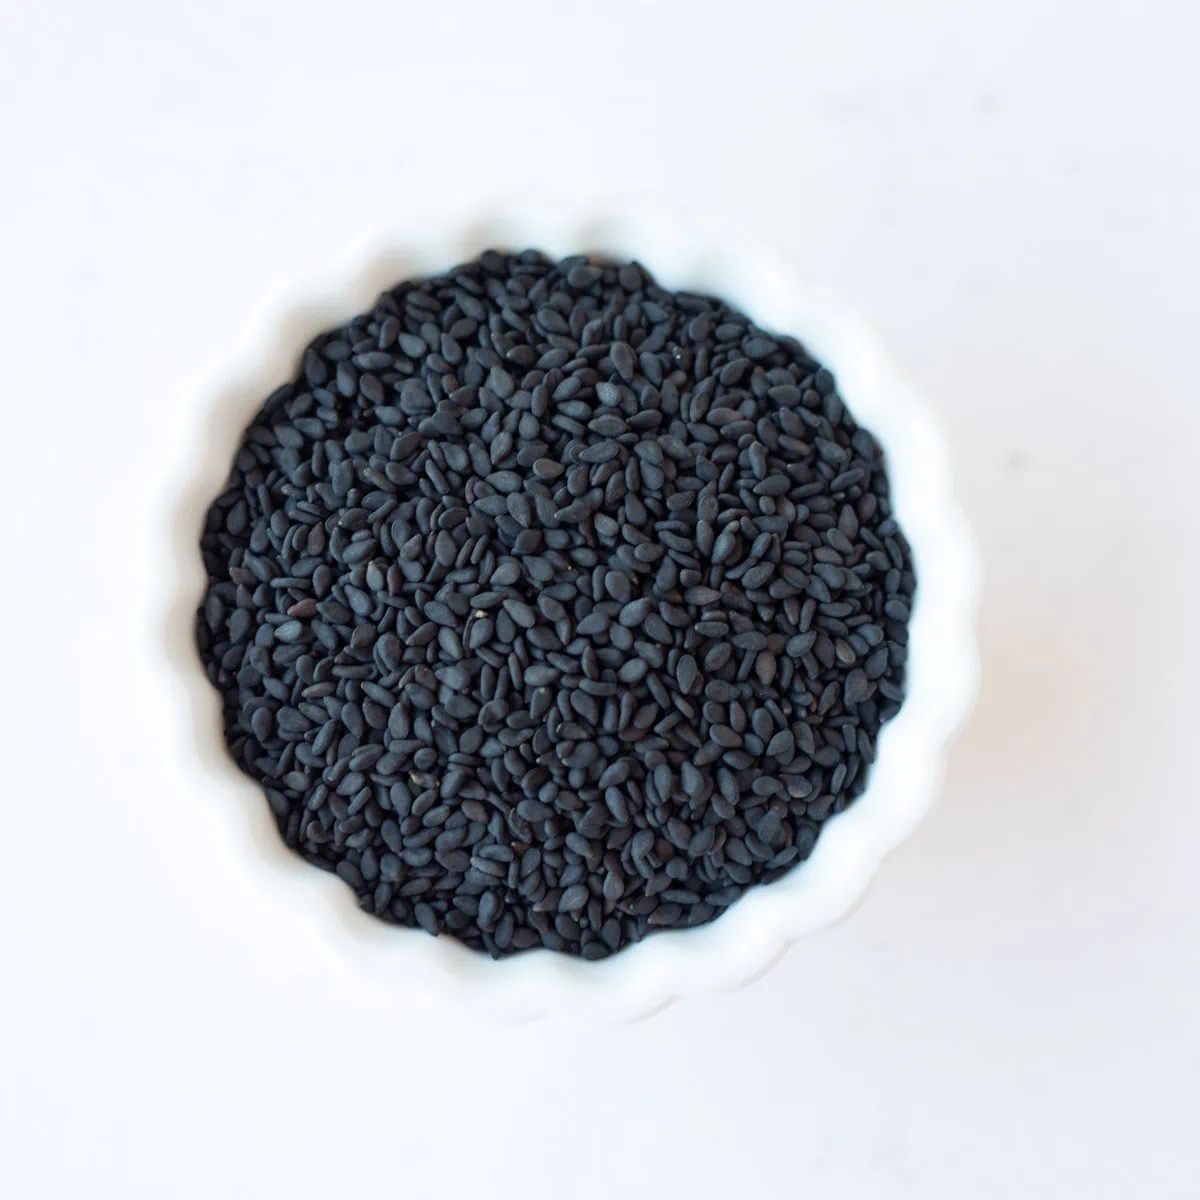 Nigella seeds in a small white bowl.